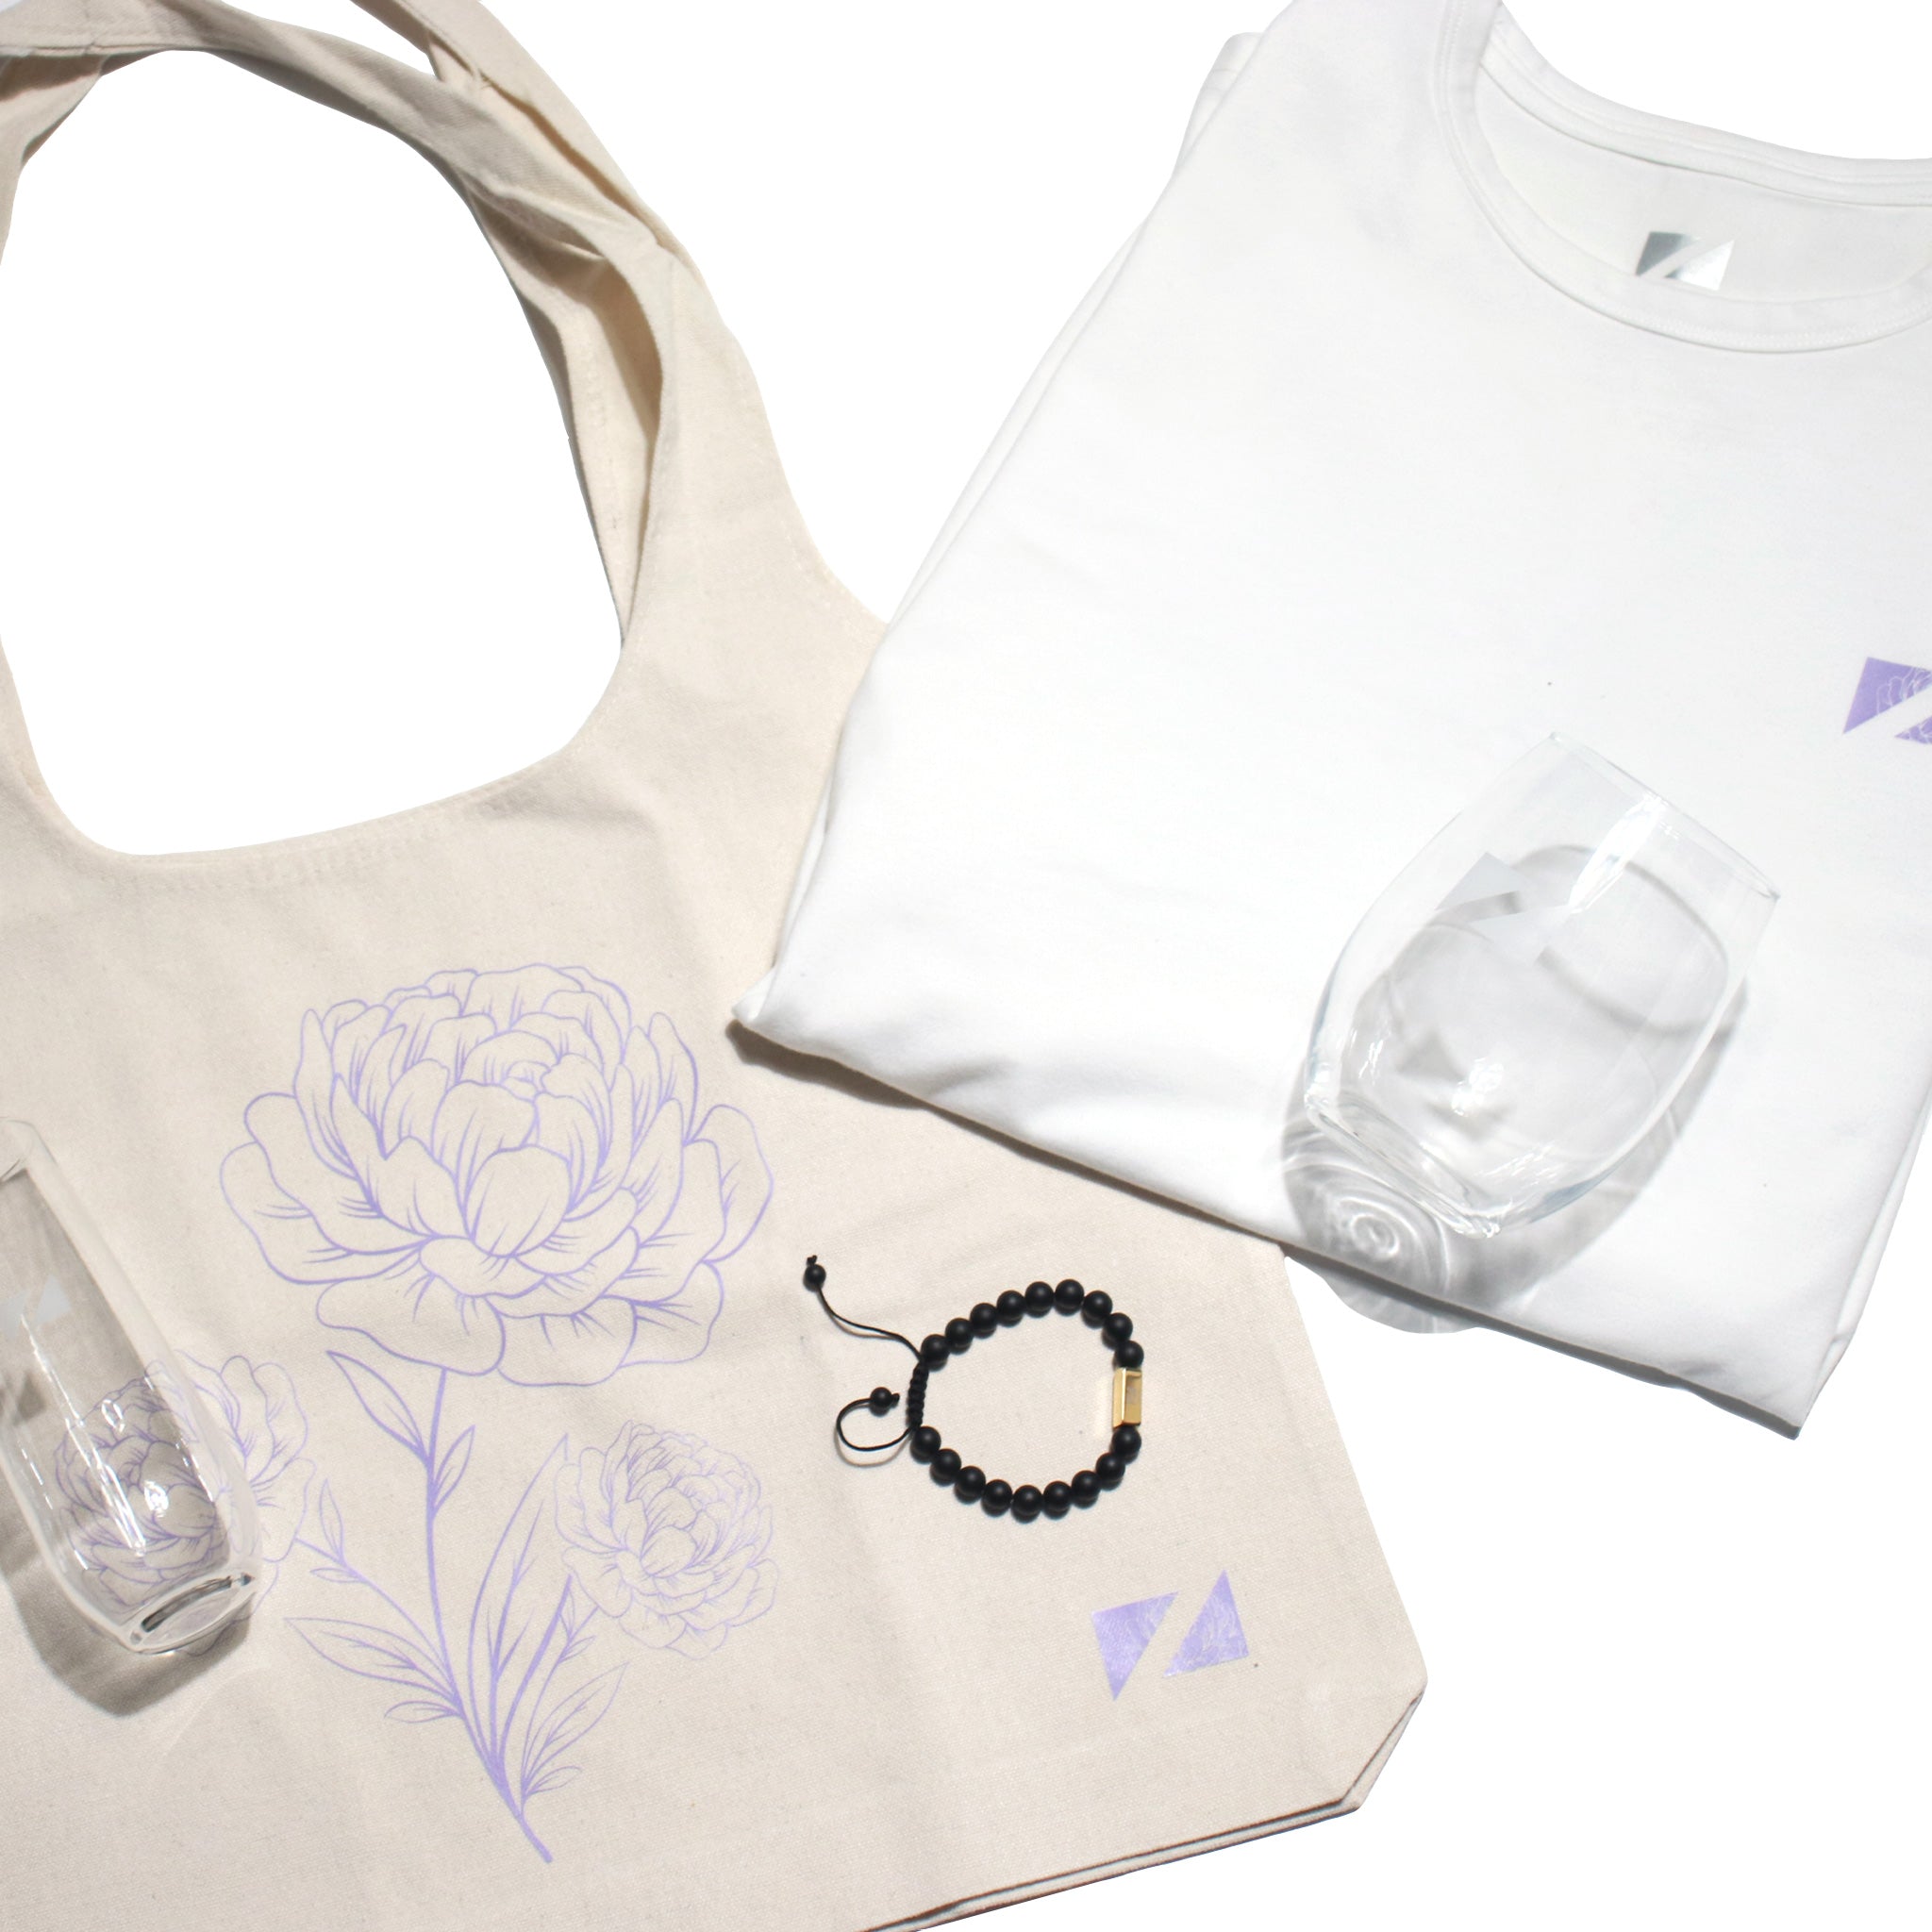 Bundle 1: Luxe Unisex Timeless Tee - Carnation + The Carnation Tote + Unwine Stemless Glass and Flute Bundle + Zueike Elements Bracelet